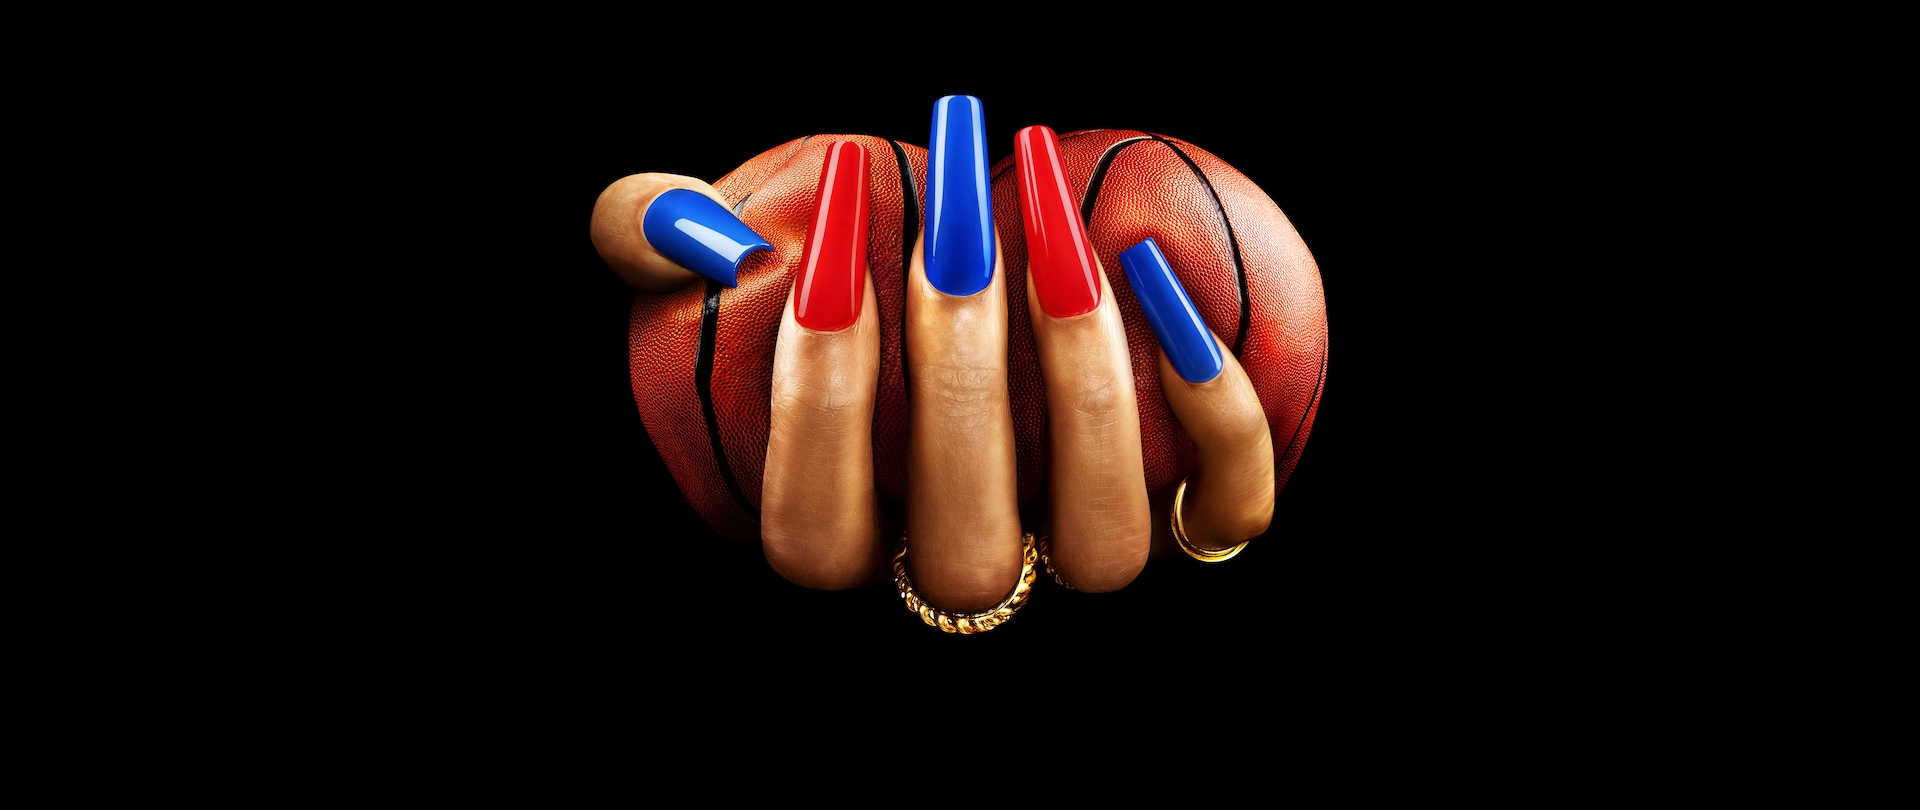 Manicured hand with long blue and red nails squeezing two basketballs